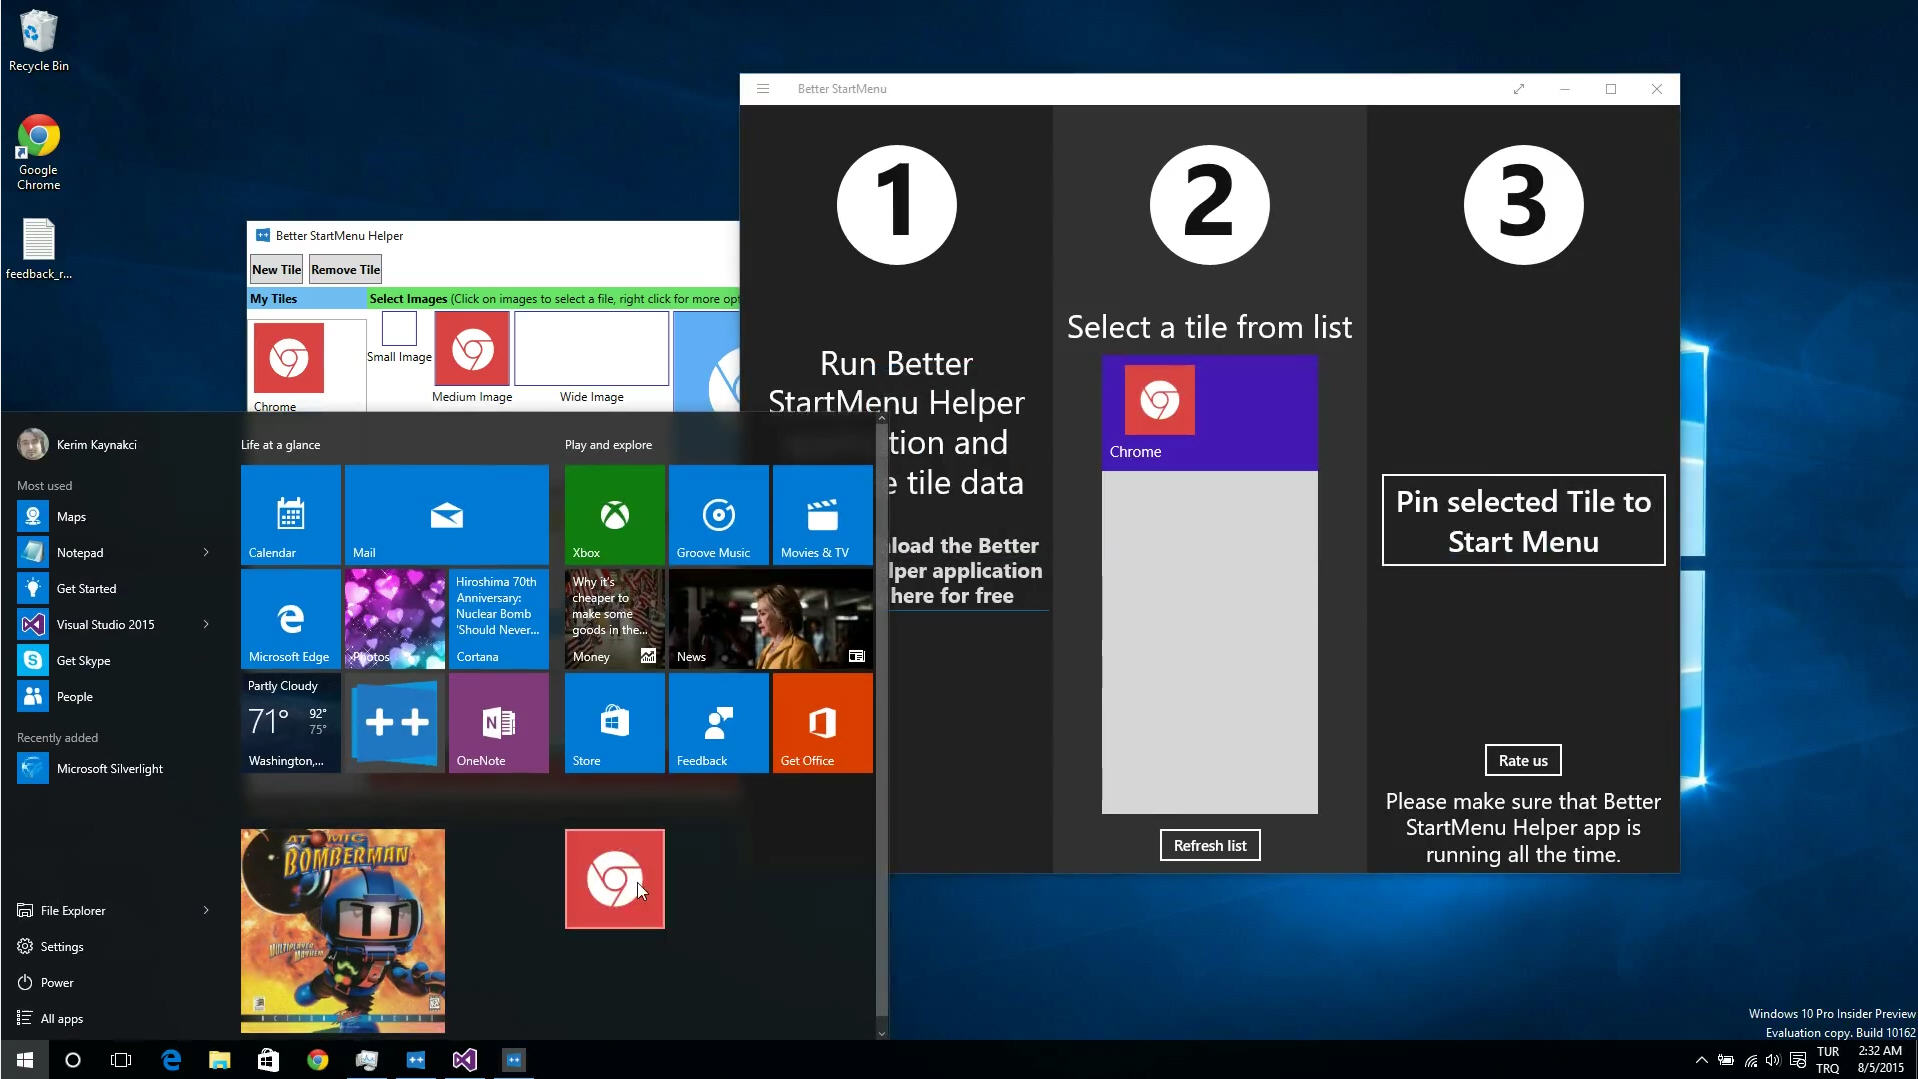 Better StartMenu for Windows 10 lets you customize the Start Tiles 